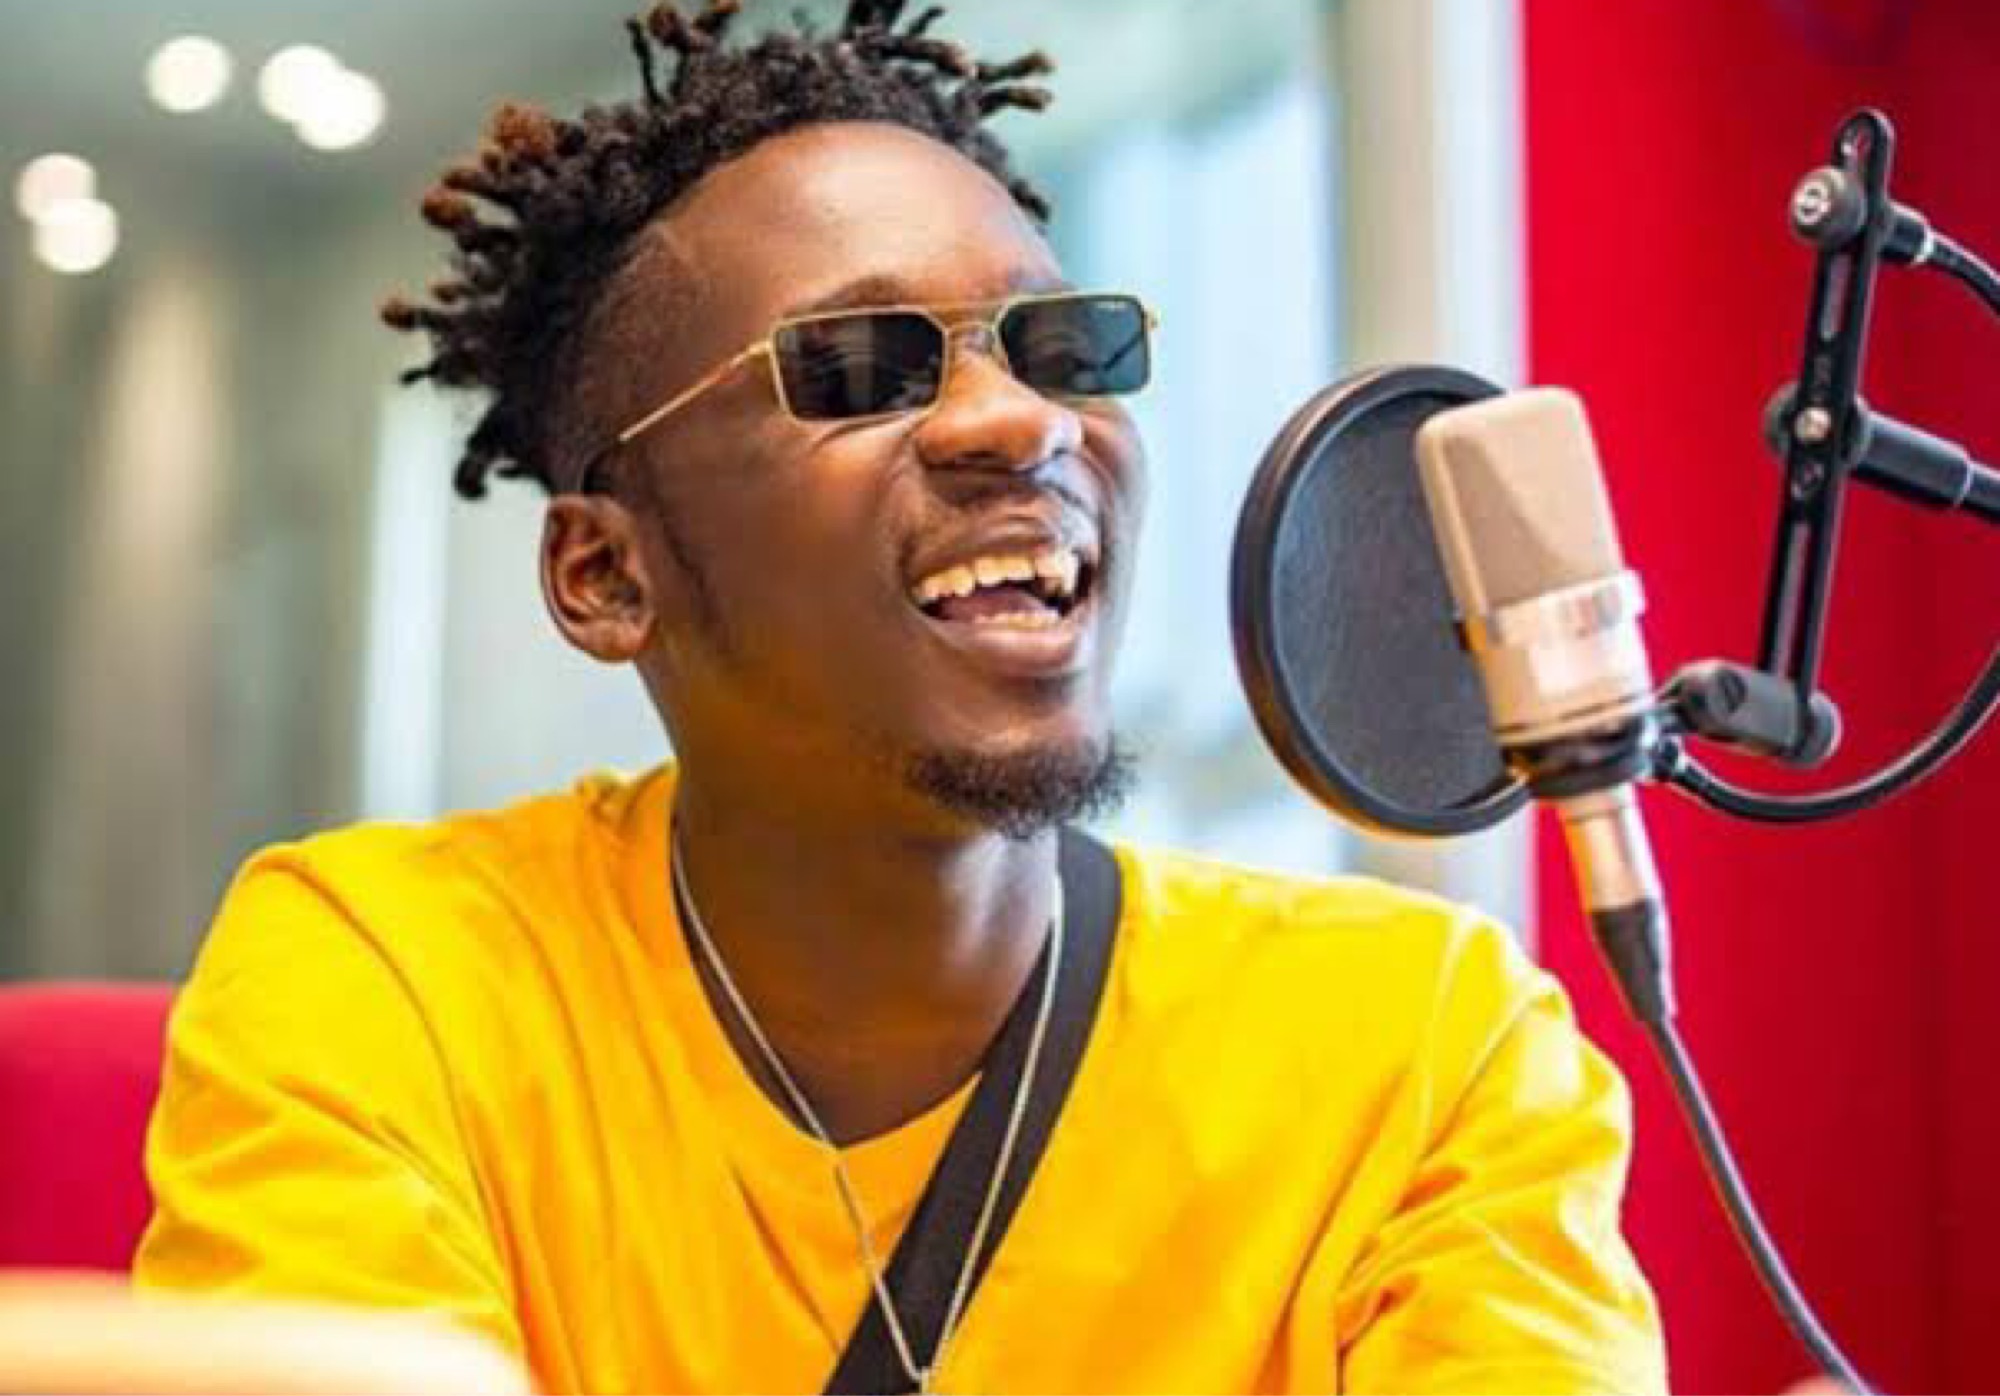 "Give Opportunity To African Children, Not Donations" - Singer Mr Eazi